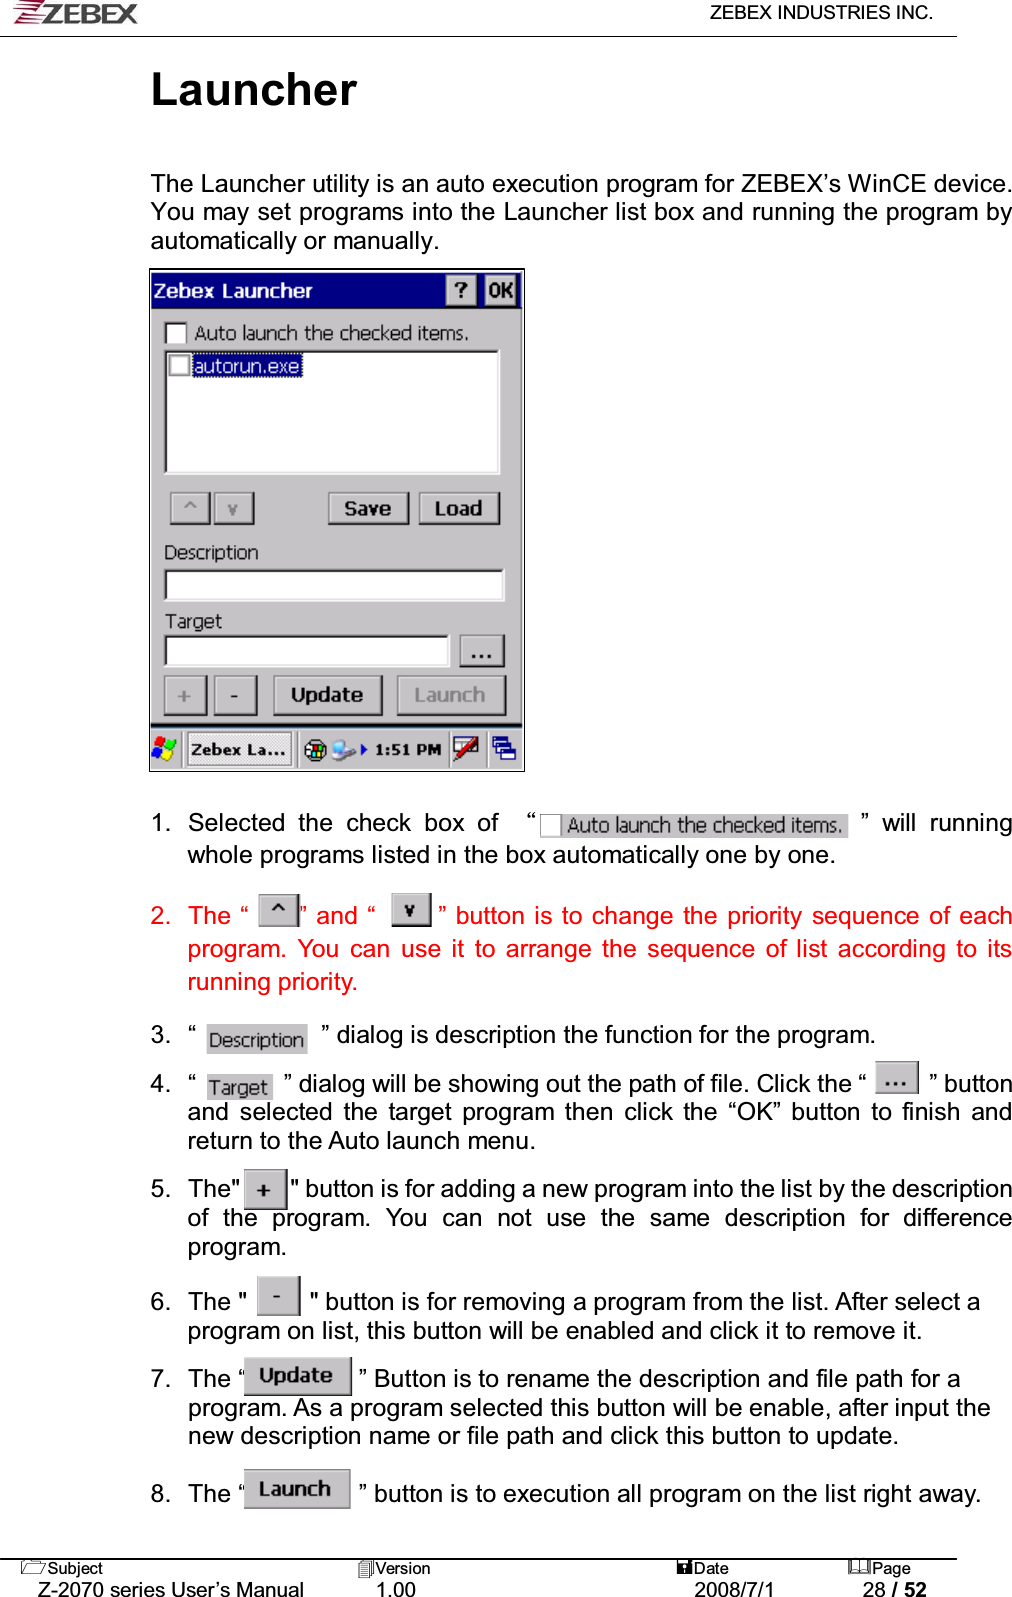   ZEBEX INDUSTRIES INC.   Subject Version  Date Page   Z-2070 series User’s Manual  1.00  2008/7/1  28 / 52 Launcher   The Launcher utility is an auto execution program for ZEBEX’s WinCE device. You may set programs into the Launcher list box and running the program by automatically or manually.                  1.  Selected the check box of ȸ!!!!!!!!!!!!!!!!!!!!!!!!!” will running whole programs listed in the box automatically one by one.  2.  The “       ” and “         ” button is to change the priority sequence of each program. You can use it to arrange the sequence of list according to its running priority.  3.  “          ” dialog is description the function for the program.  4.  “       ” dialog will be showing out the path of file. Click the “     ” button and selected the target program then click the “OK” button to finish and return to the Auto launch menu.  5.  The&quot;        &quot; button is for adding a new program into the list by the description of the program. You can not use the same description for difference program.  6.  The &quot;     &quot; button is for removing a program from the list. After select a program on list, this button will be enabled and click it to remove it.  7.  The “                  ” Button is to rename the description and file path for a program. As a program selected this button will be enable, after input the new description name or file path and click this button to update.  8.  The “         ” button is to execution all program on the list right away. 